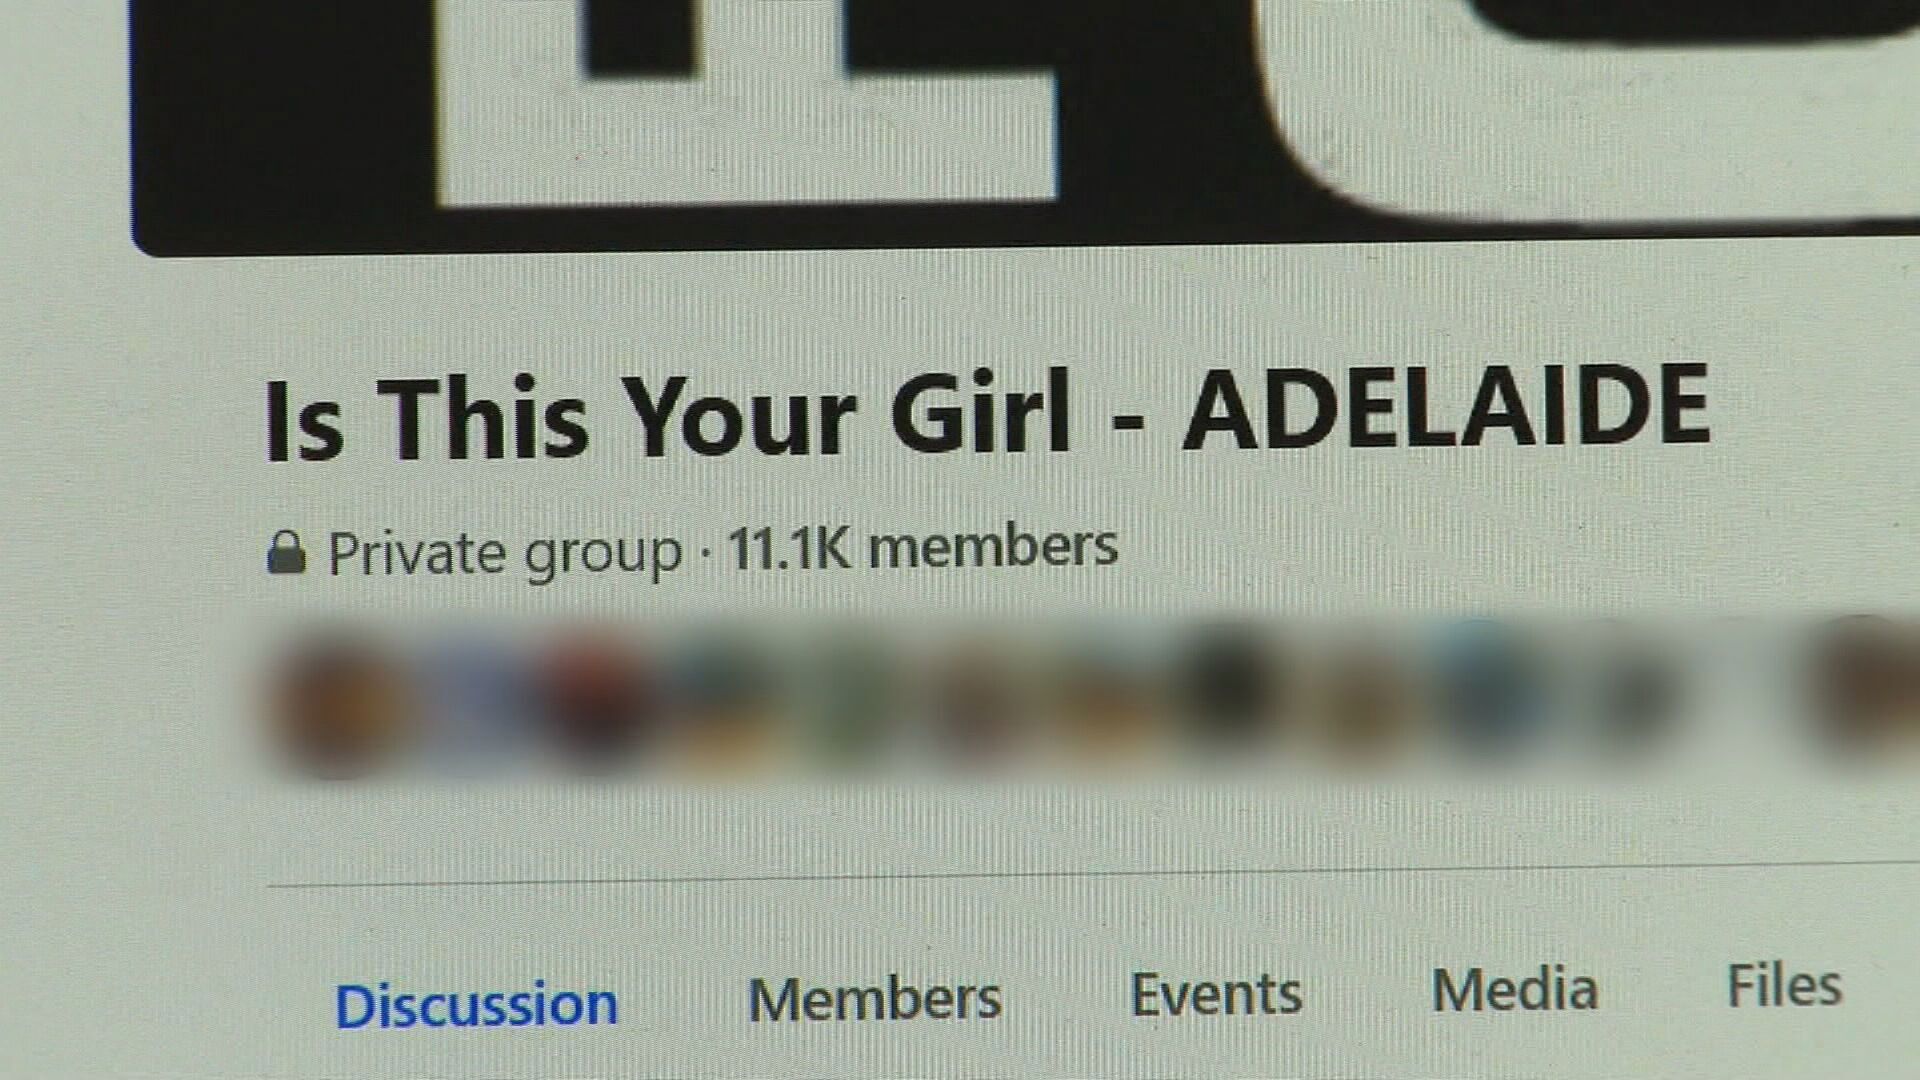 Men's Facebook page degrading, doxxing Adelaide women sparks fears